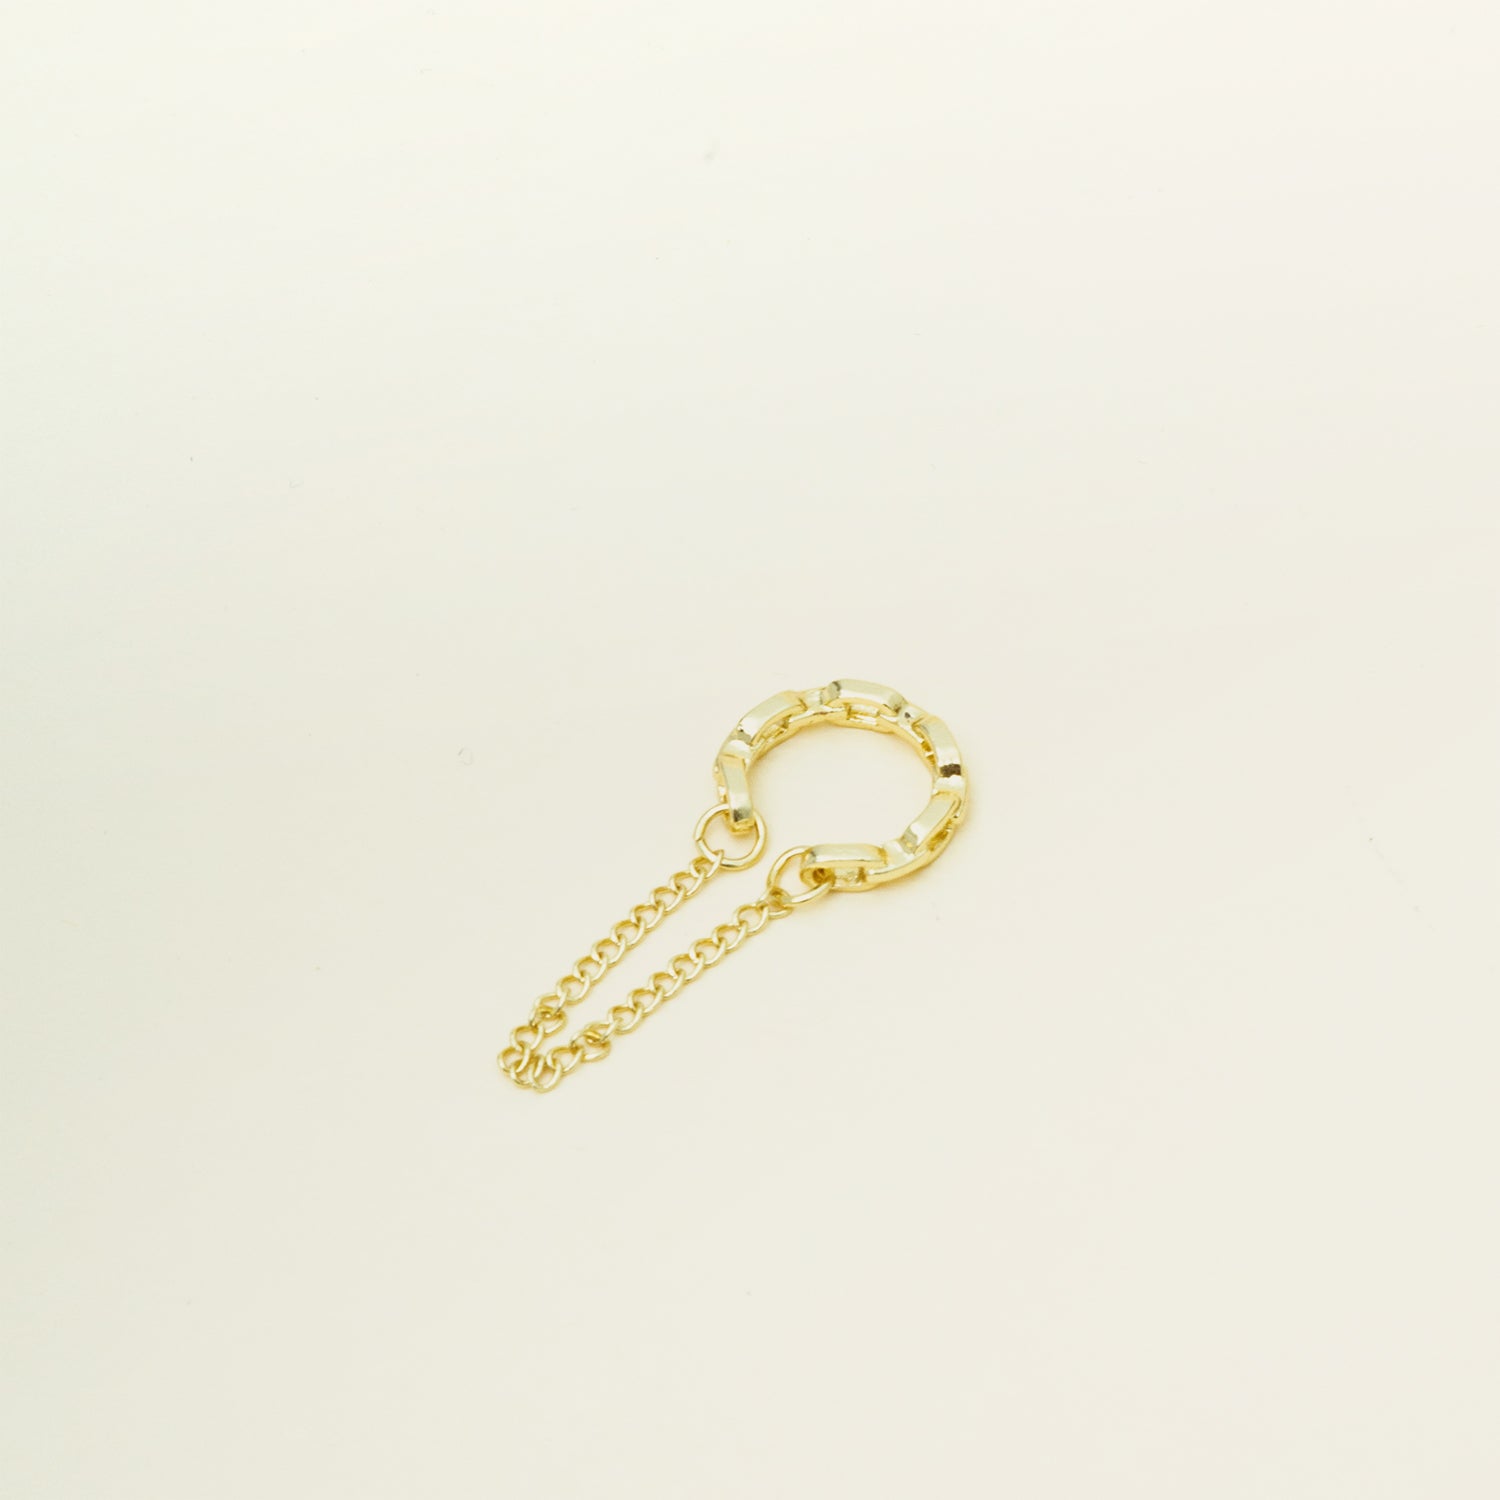 Catalogue Image of a modern Dual Chain Ear Cuff crafted from Goldtone or Silvertone plated zinc alloy. This trendy accessory features a delicate chain, designed to elegantly adorn the earlobe of both men and women.